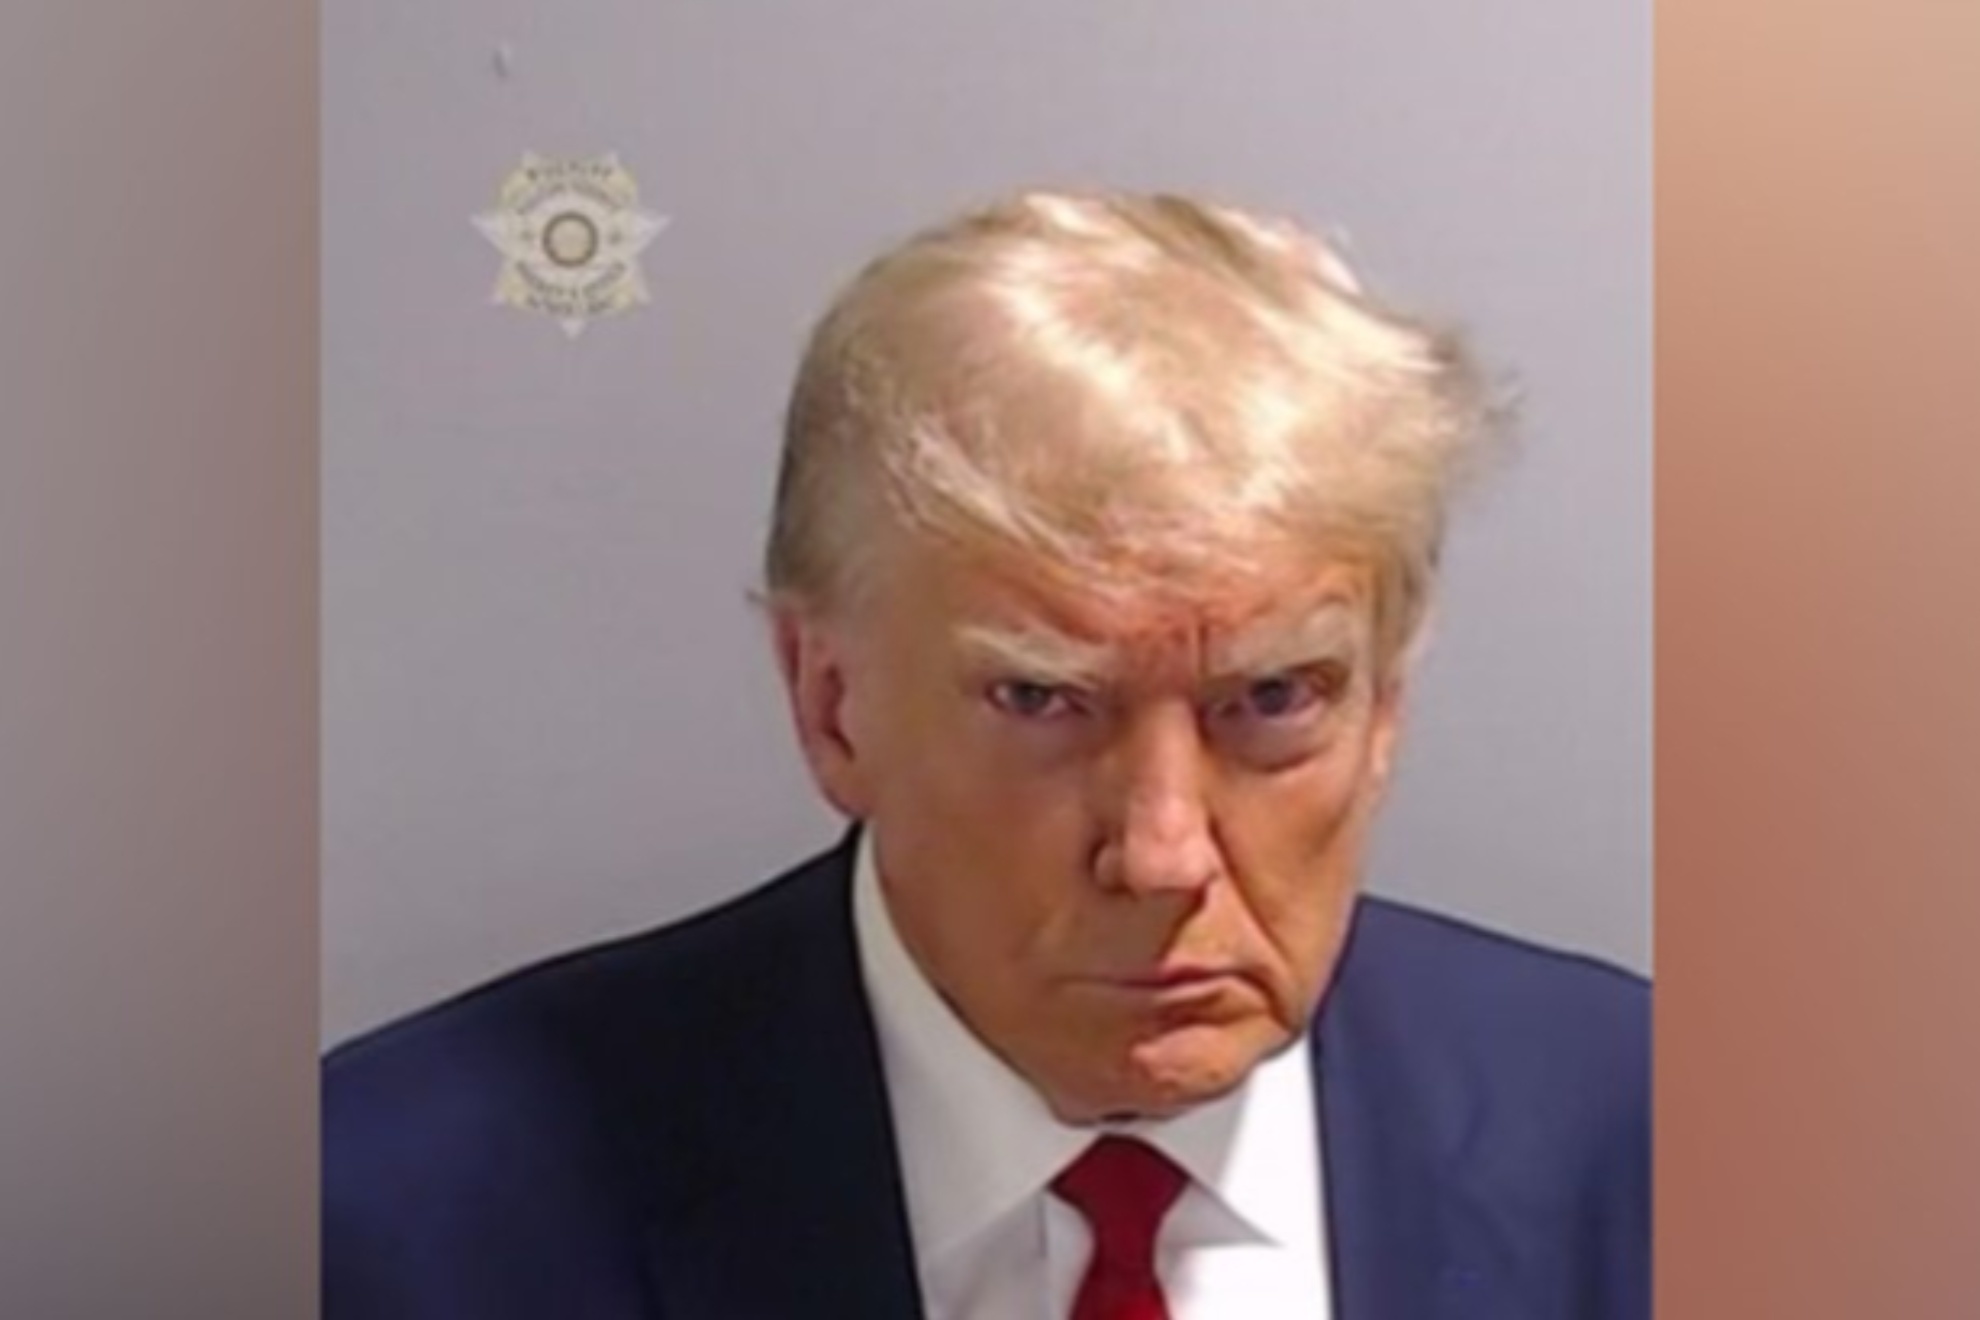 Donald Trump has been booked on 13 felony charges at an Atlanta jail